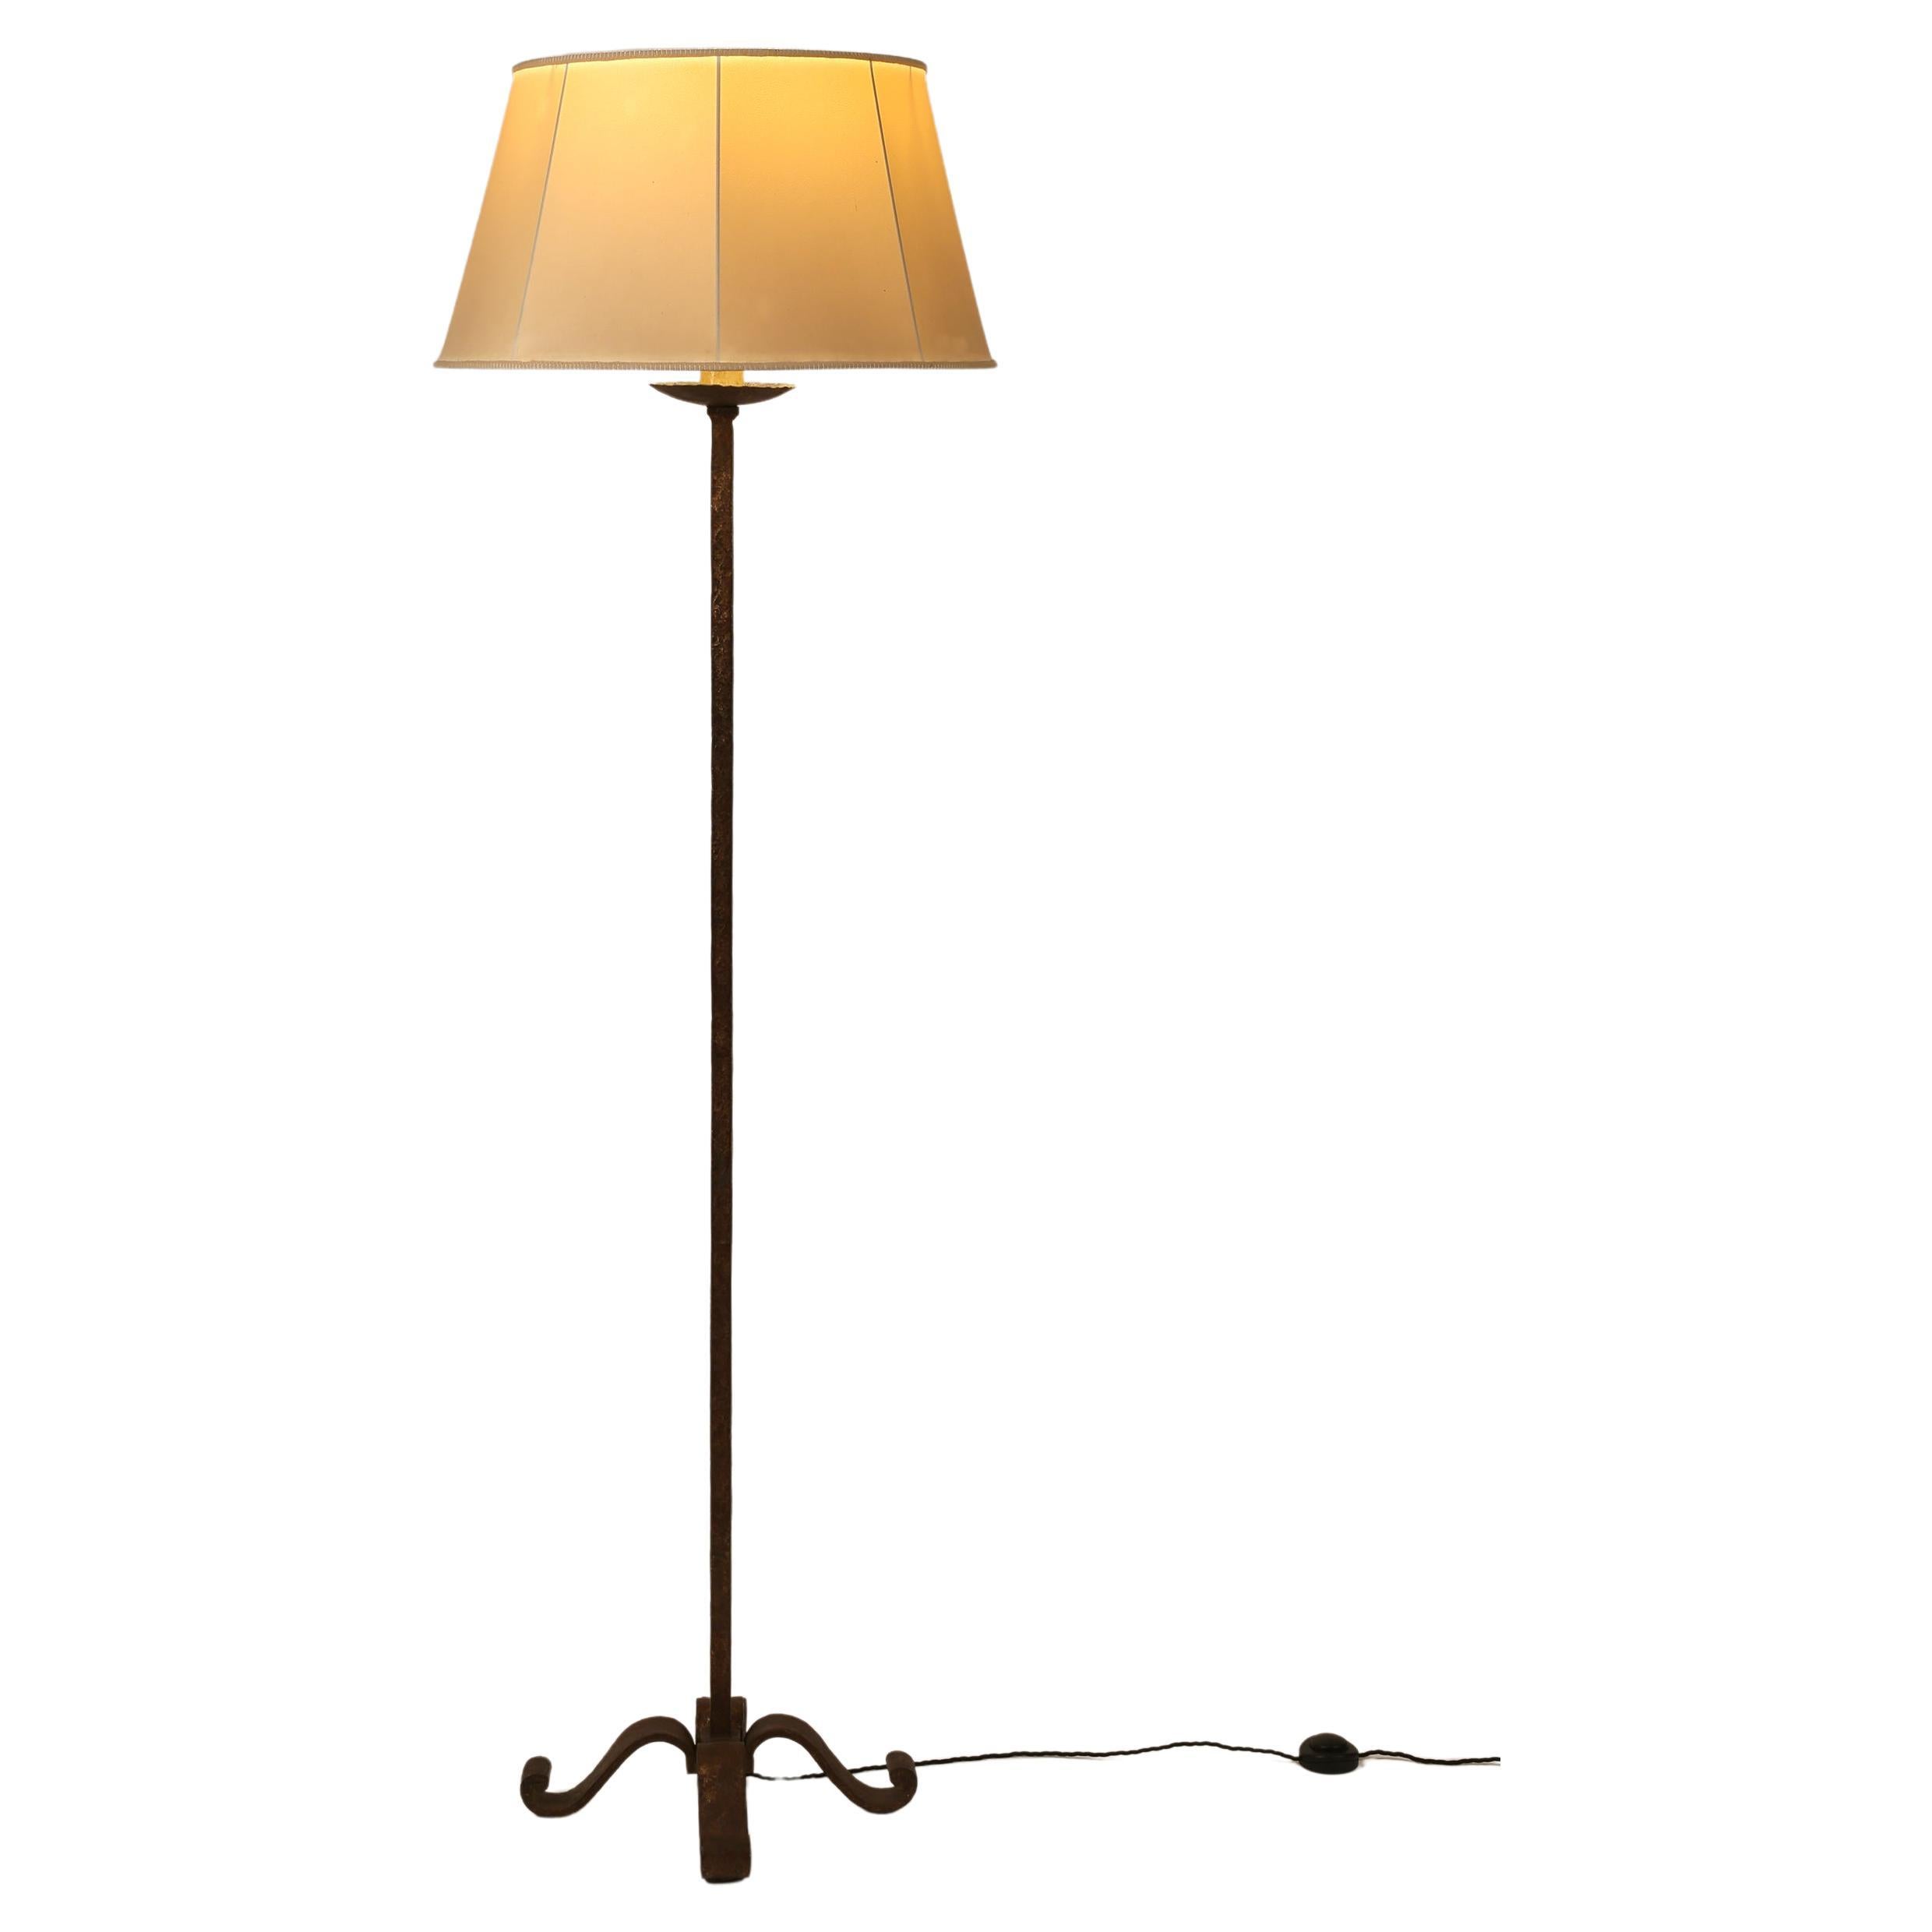 French 1940s Maison Ramsay Art Deco Floor Lamp In Gilt Forged Iron For Sale